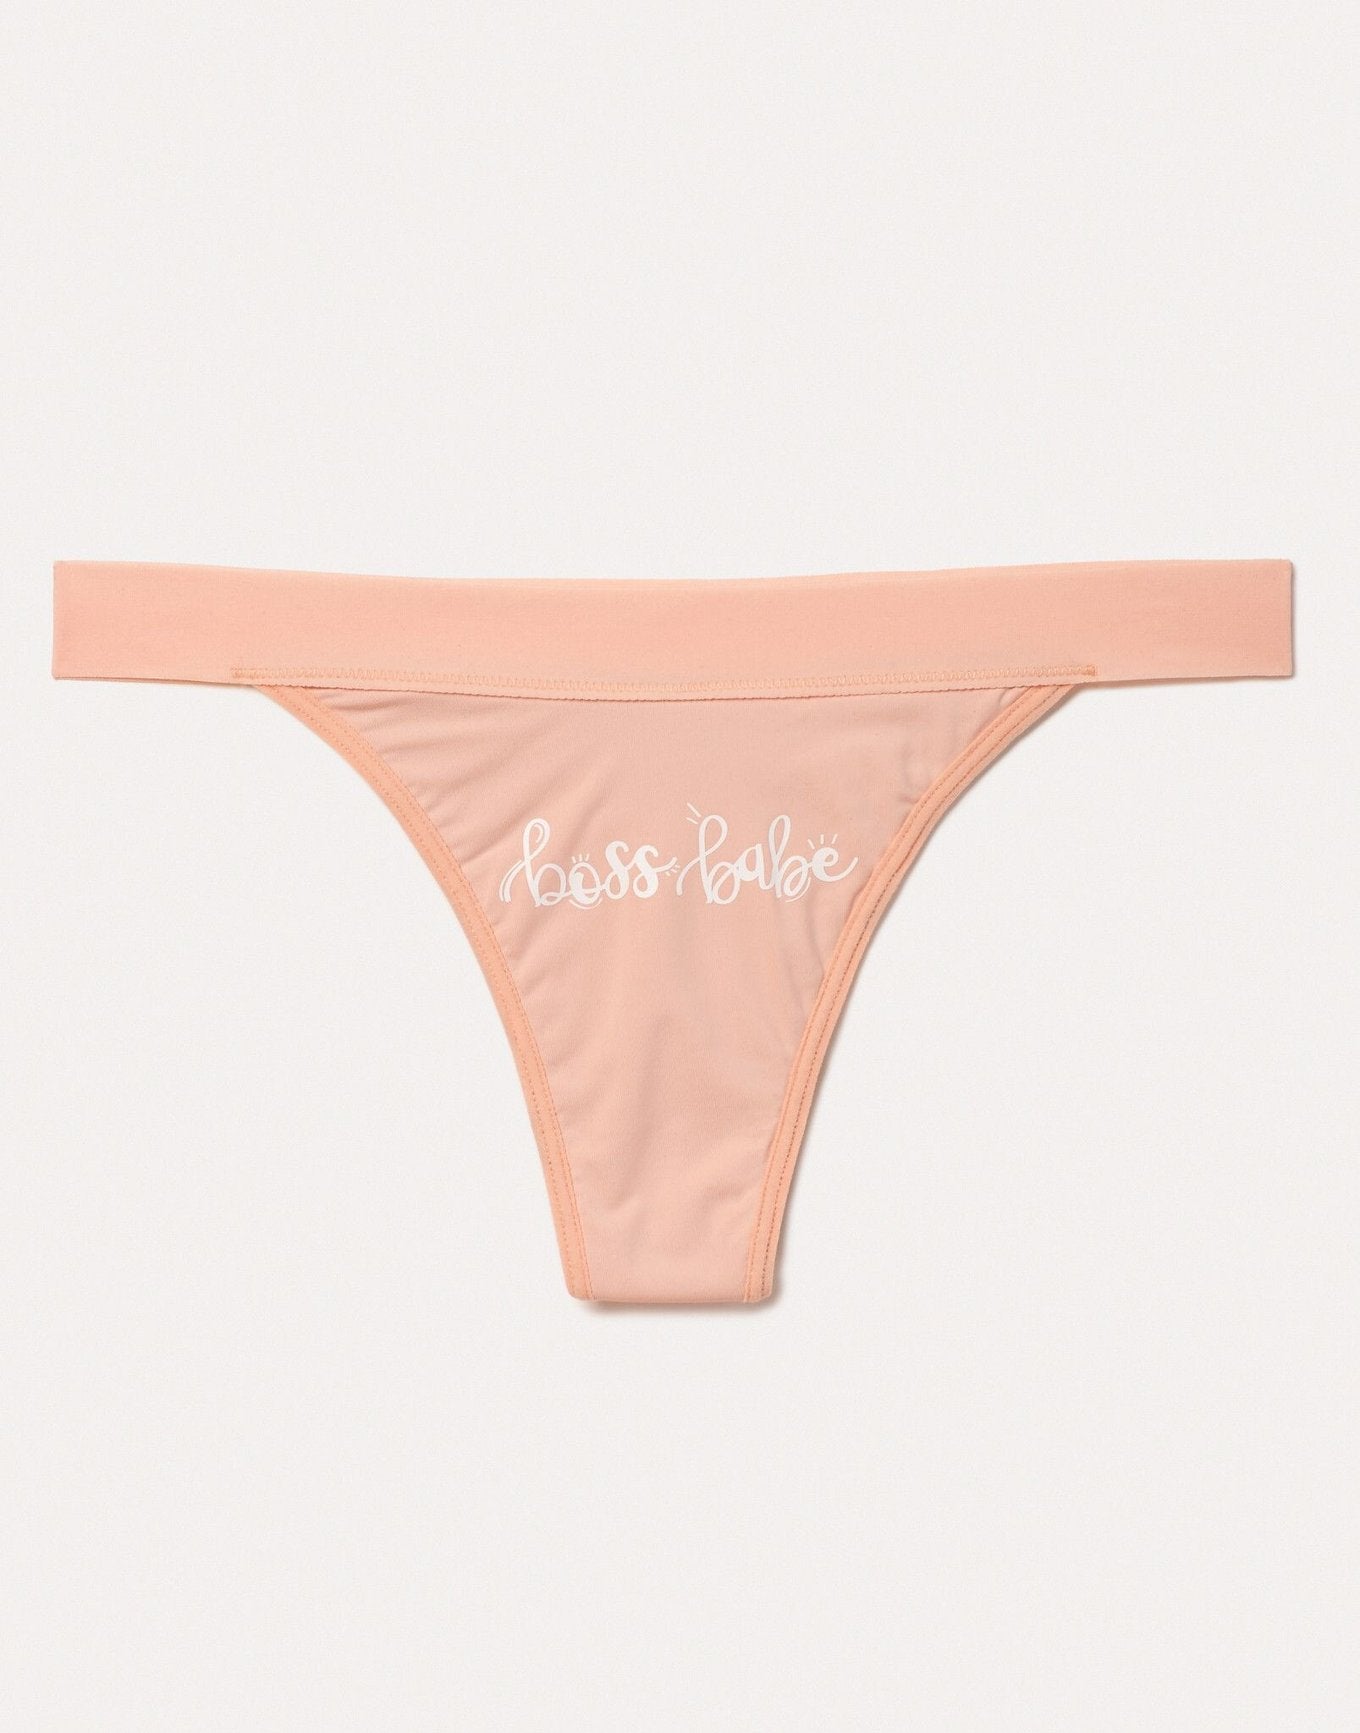 Joyja Leah period-proof panty in color Boss Babe and shape thong